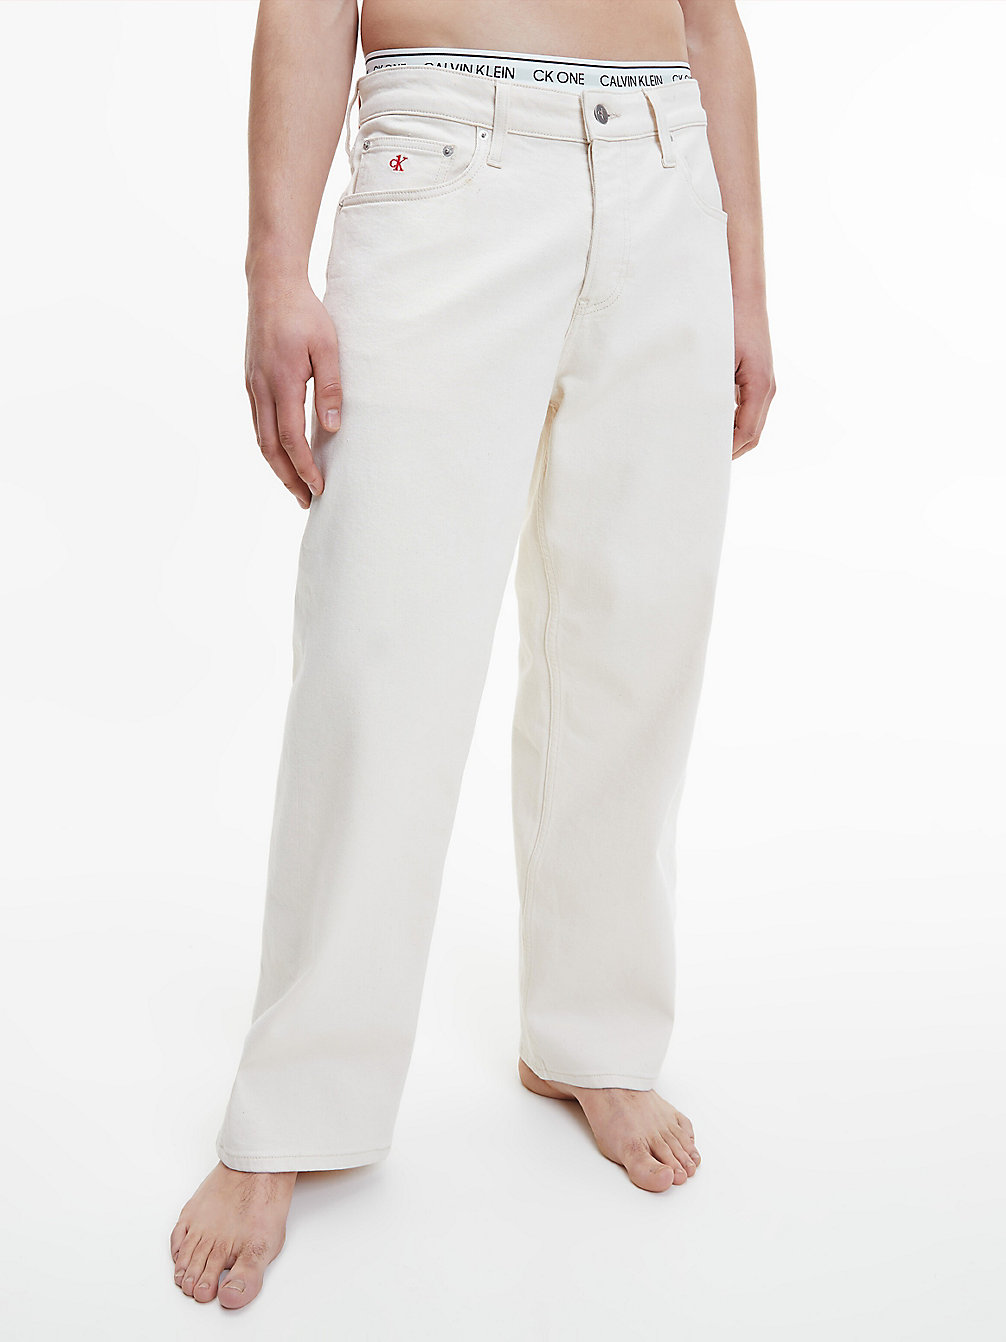 Wide Leg Jeans - CK One > CRESCENT MOON > undefined mujer > Calvin Klein